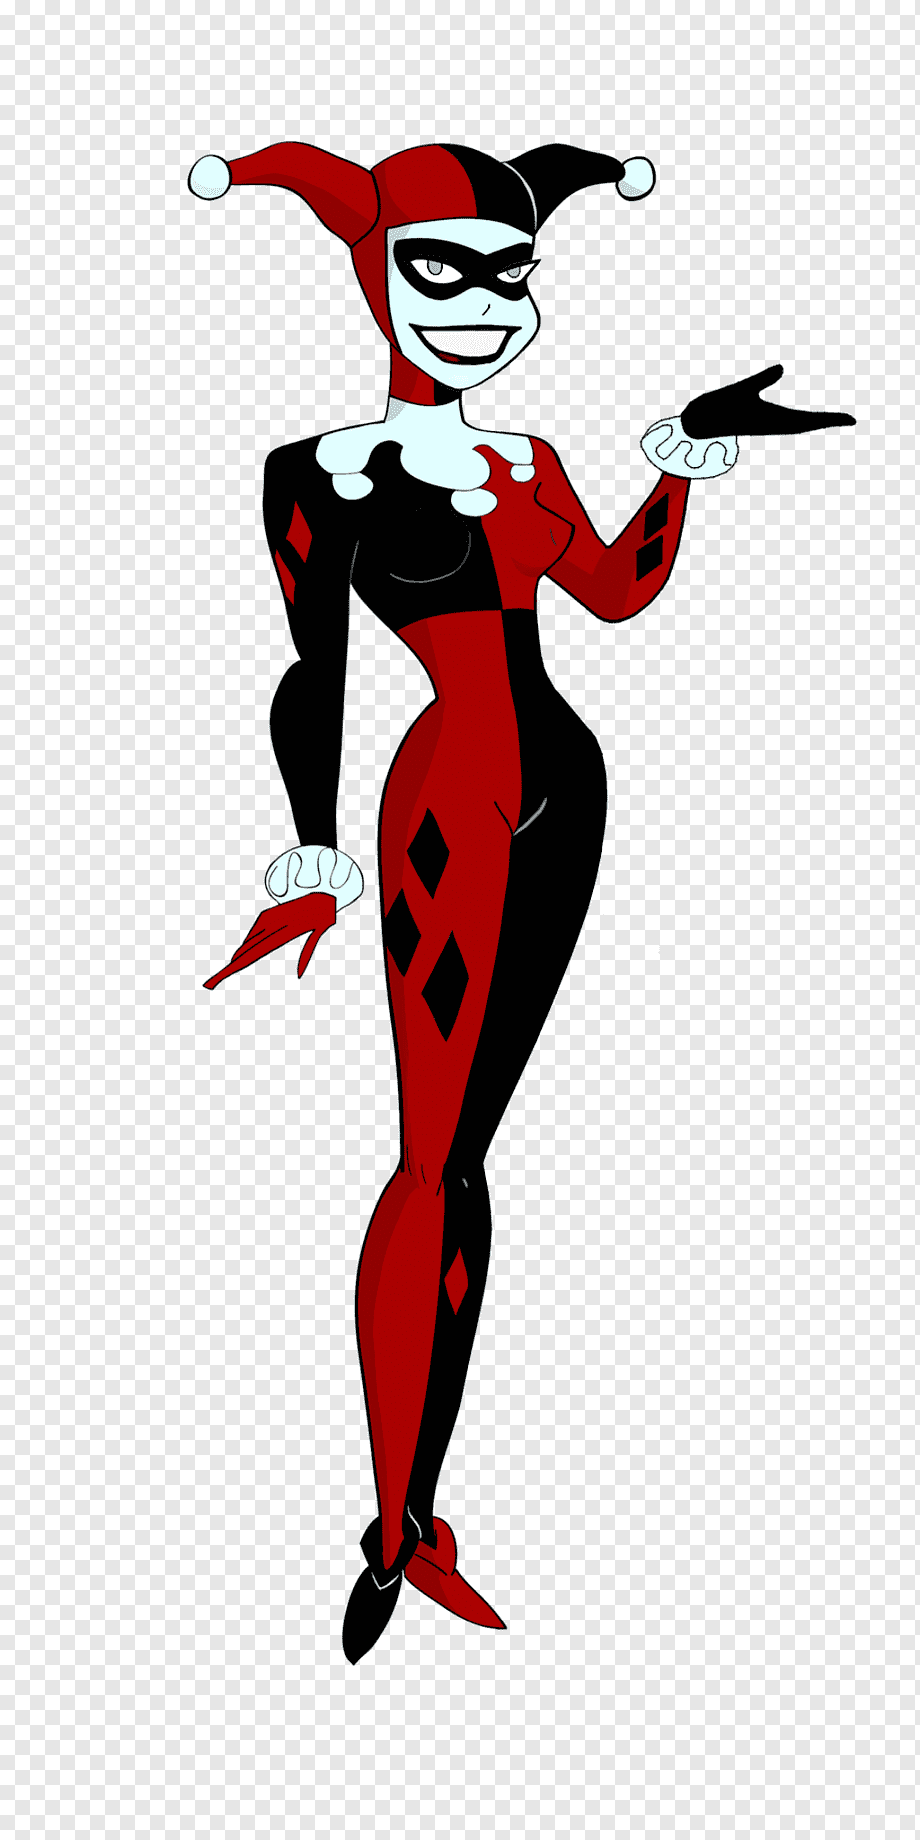 instante Repetirse conjunto RUBY DOLLY — EVERY VERSION OF HARLEY QUINN